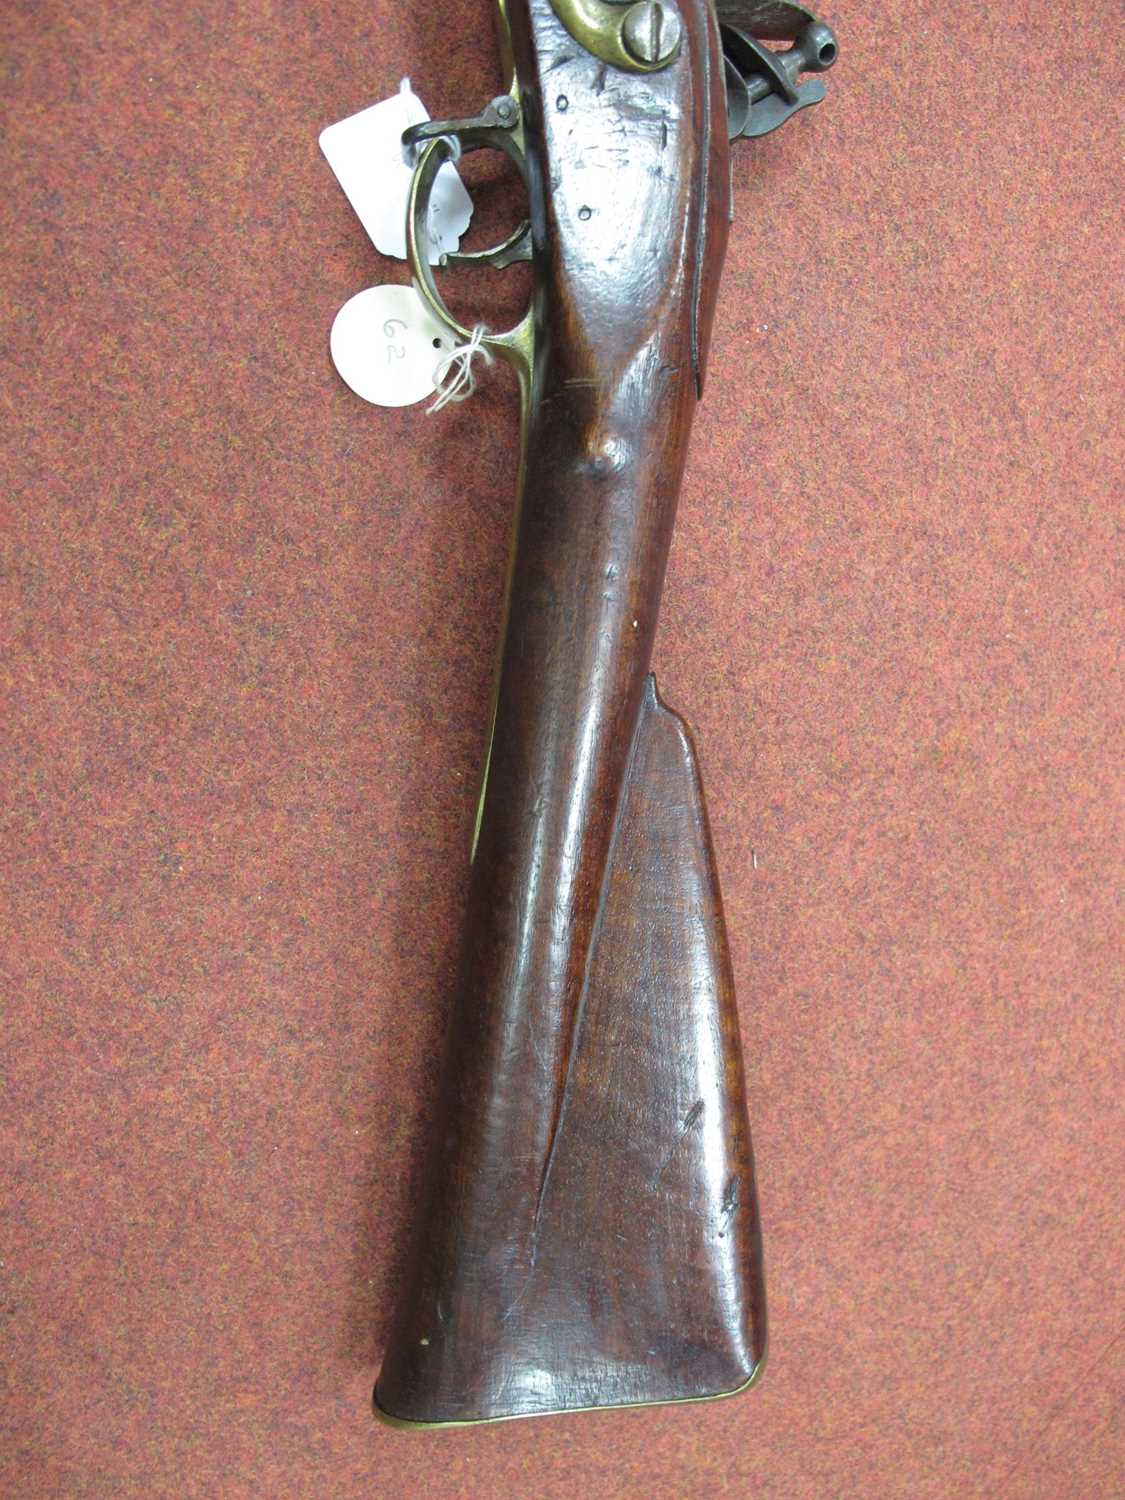 British India Pattern Circa 1810 'Brown Bess' Flintlock Musket, marked 'Tower' with 'GR' crown - Image 13 of 17